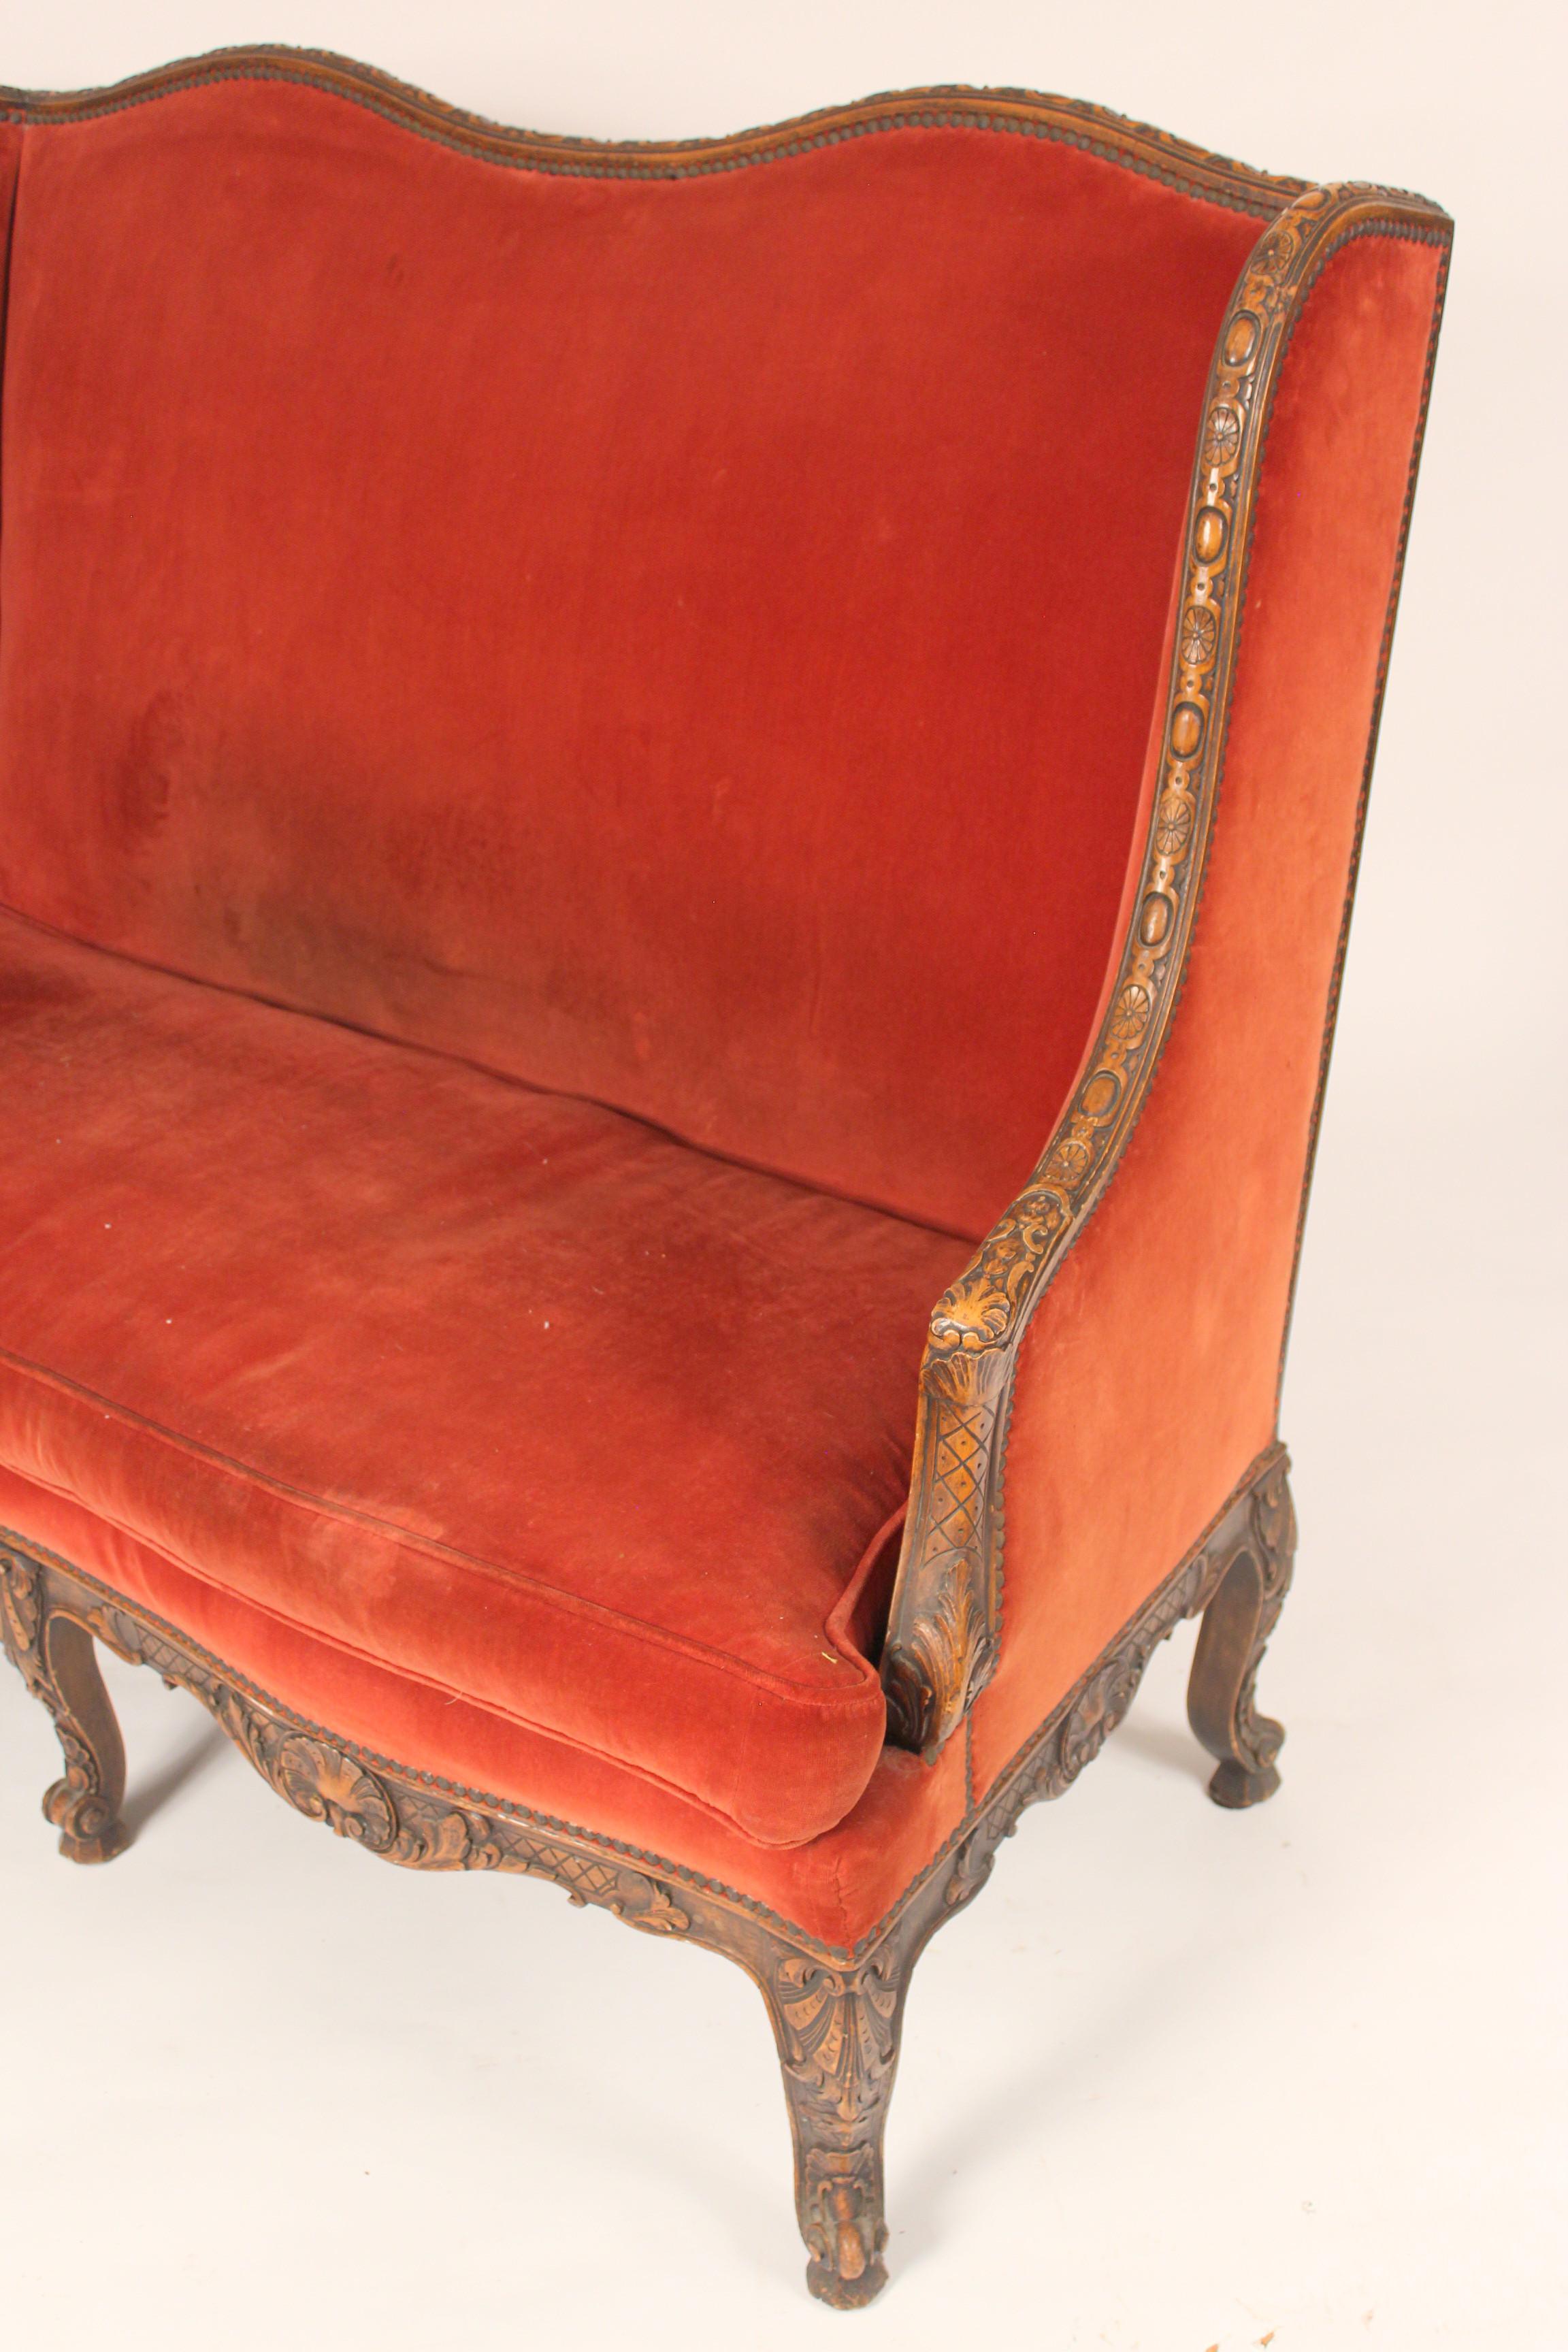 19th Century Antique French Regence Style Settee